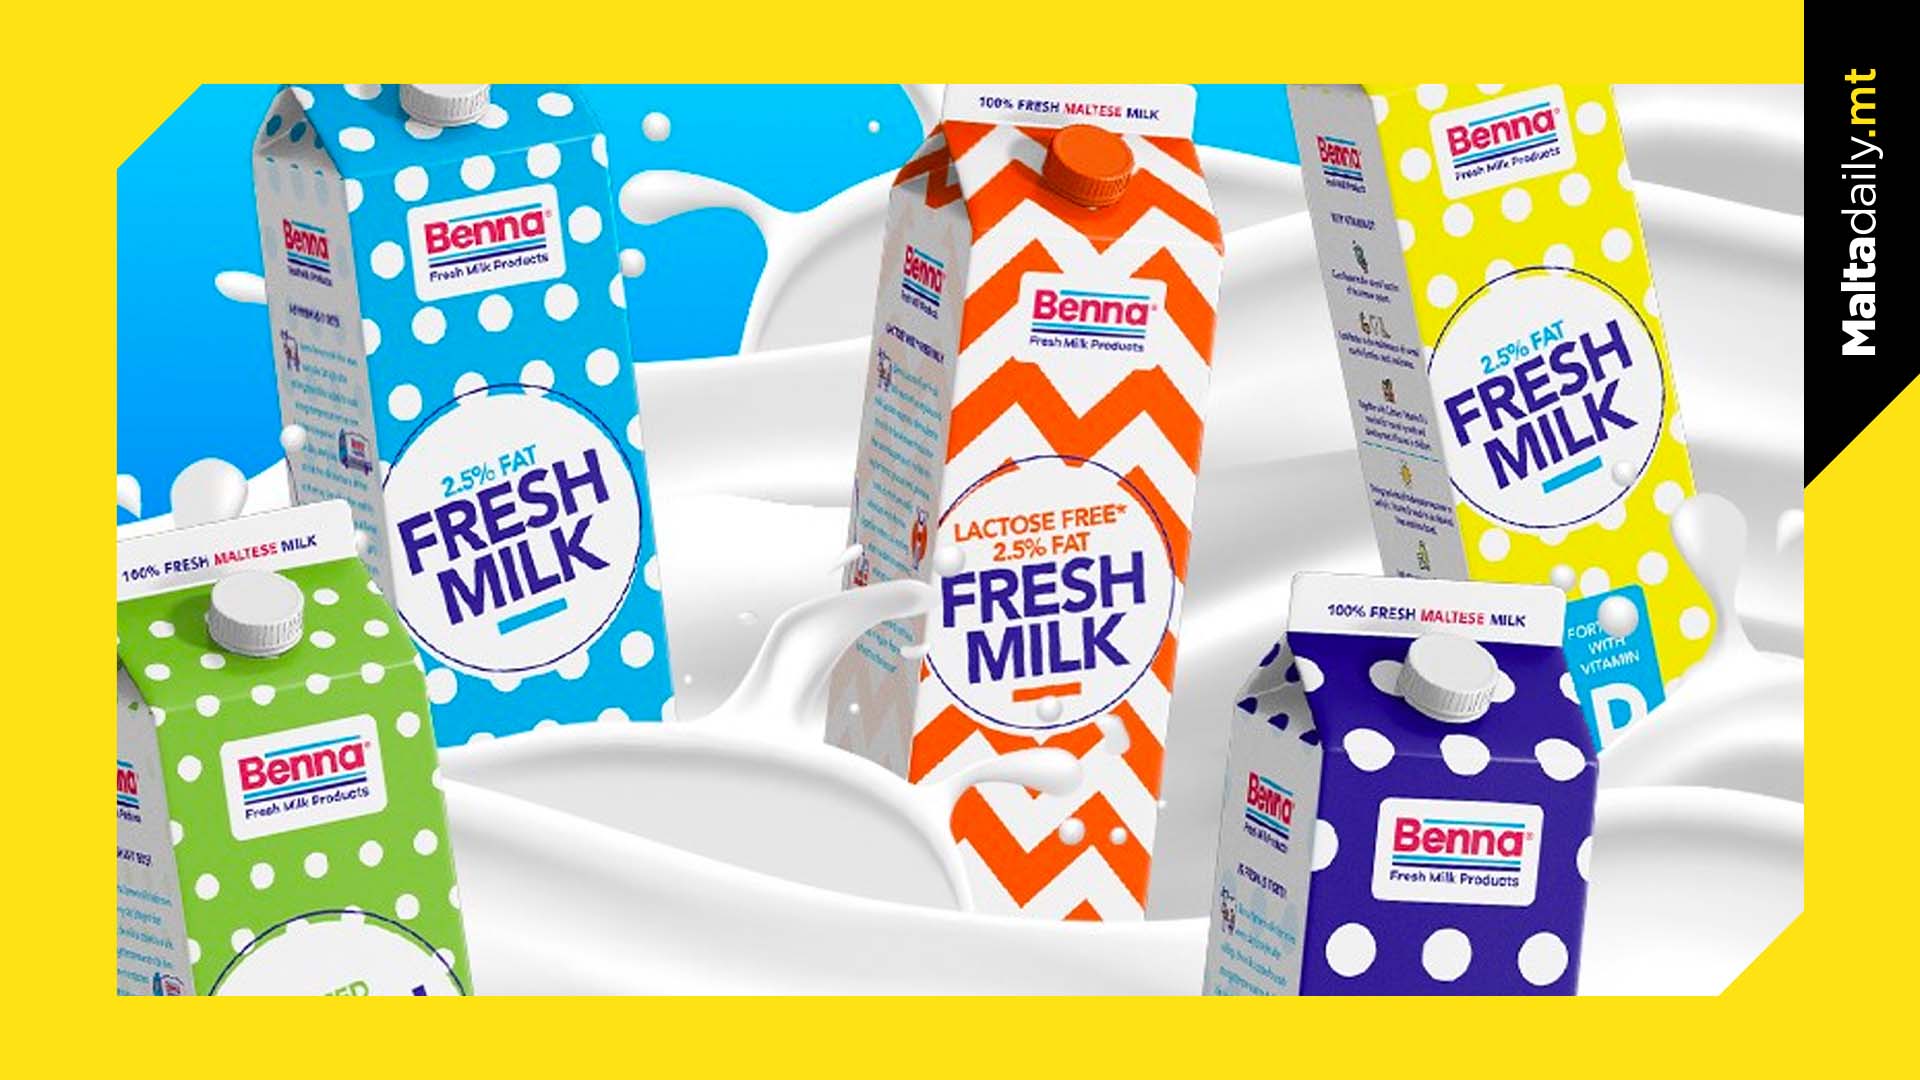 Fresh milk products price increase announced